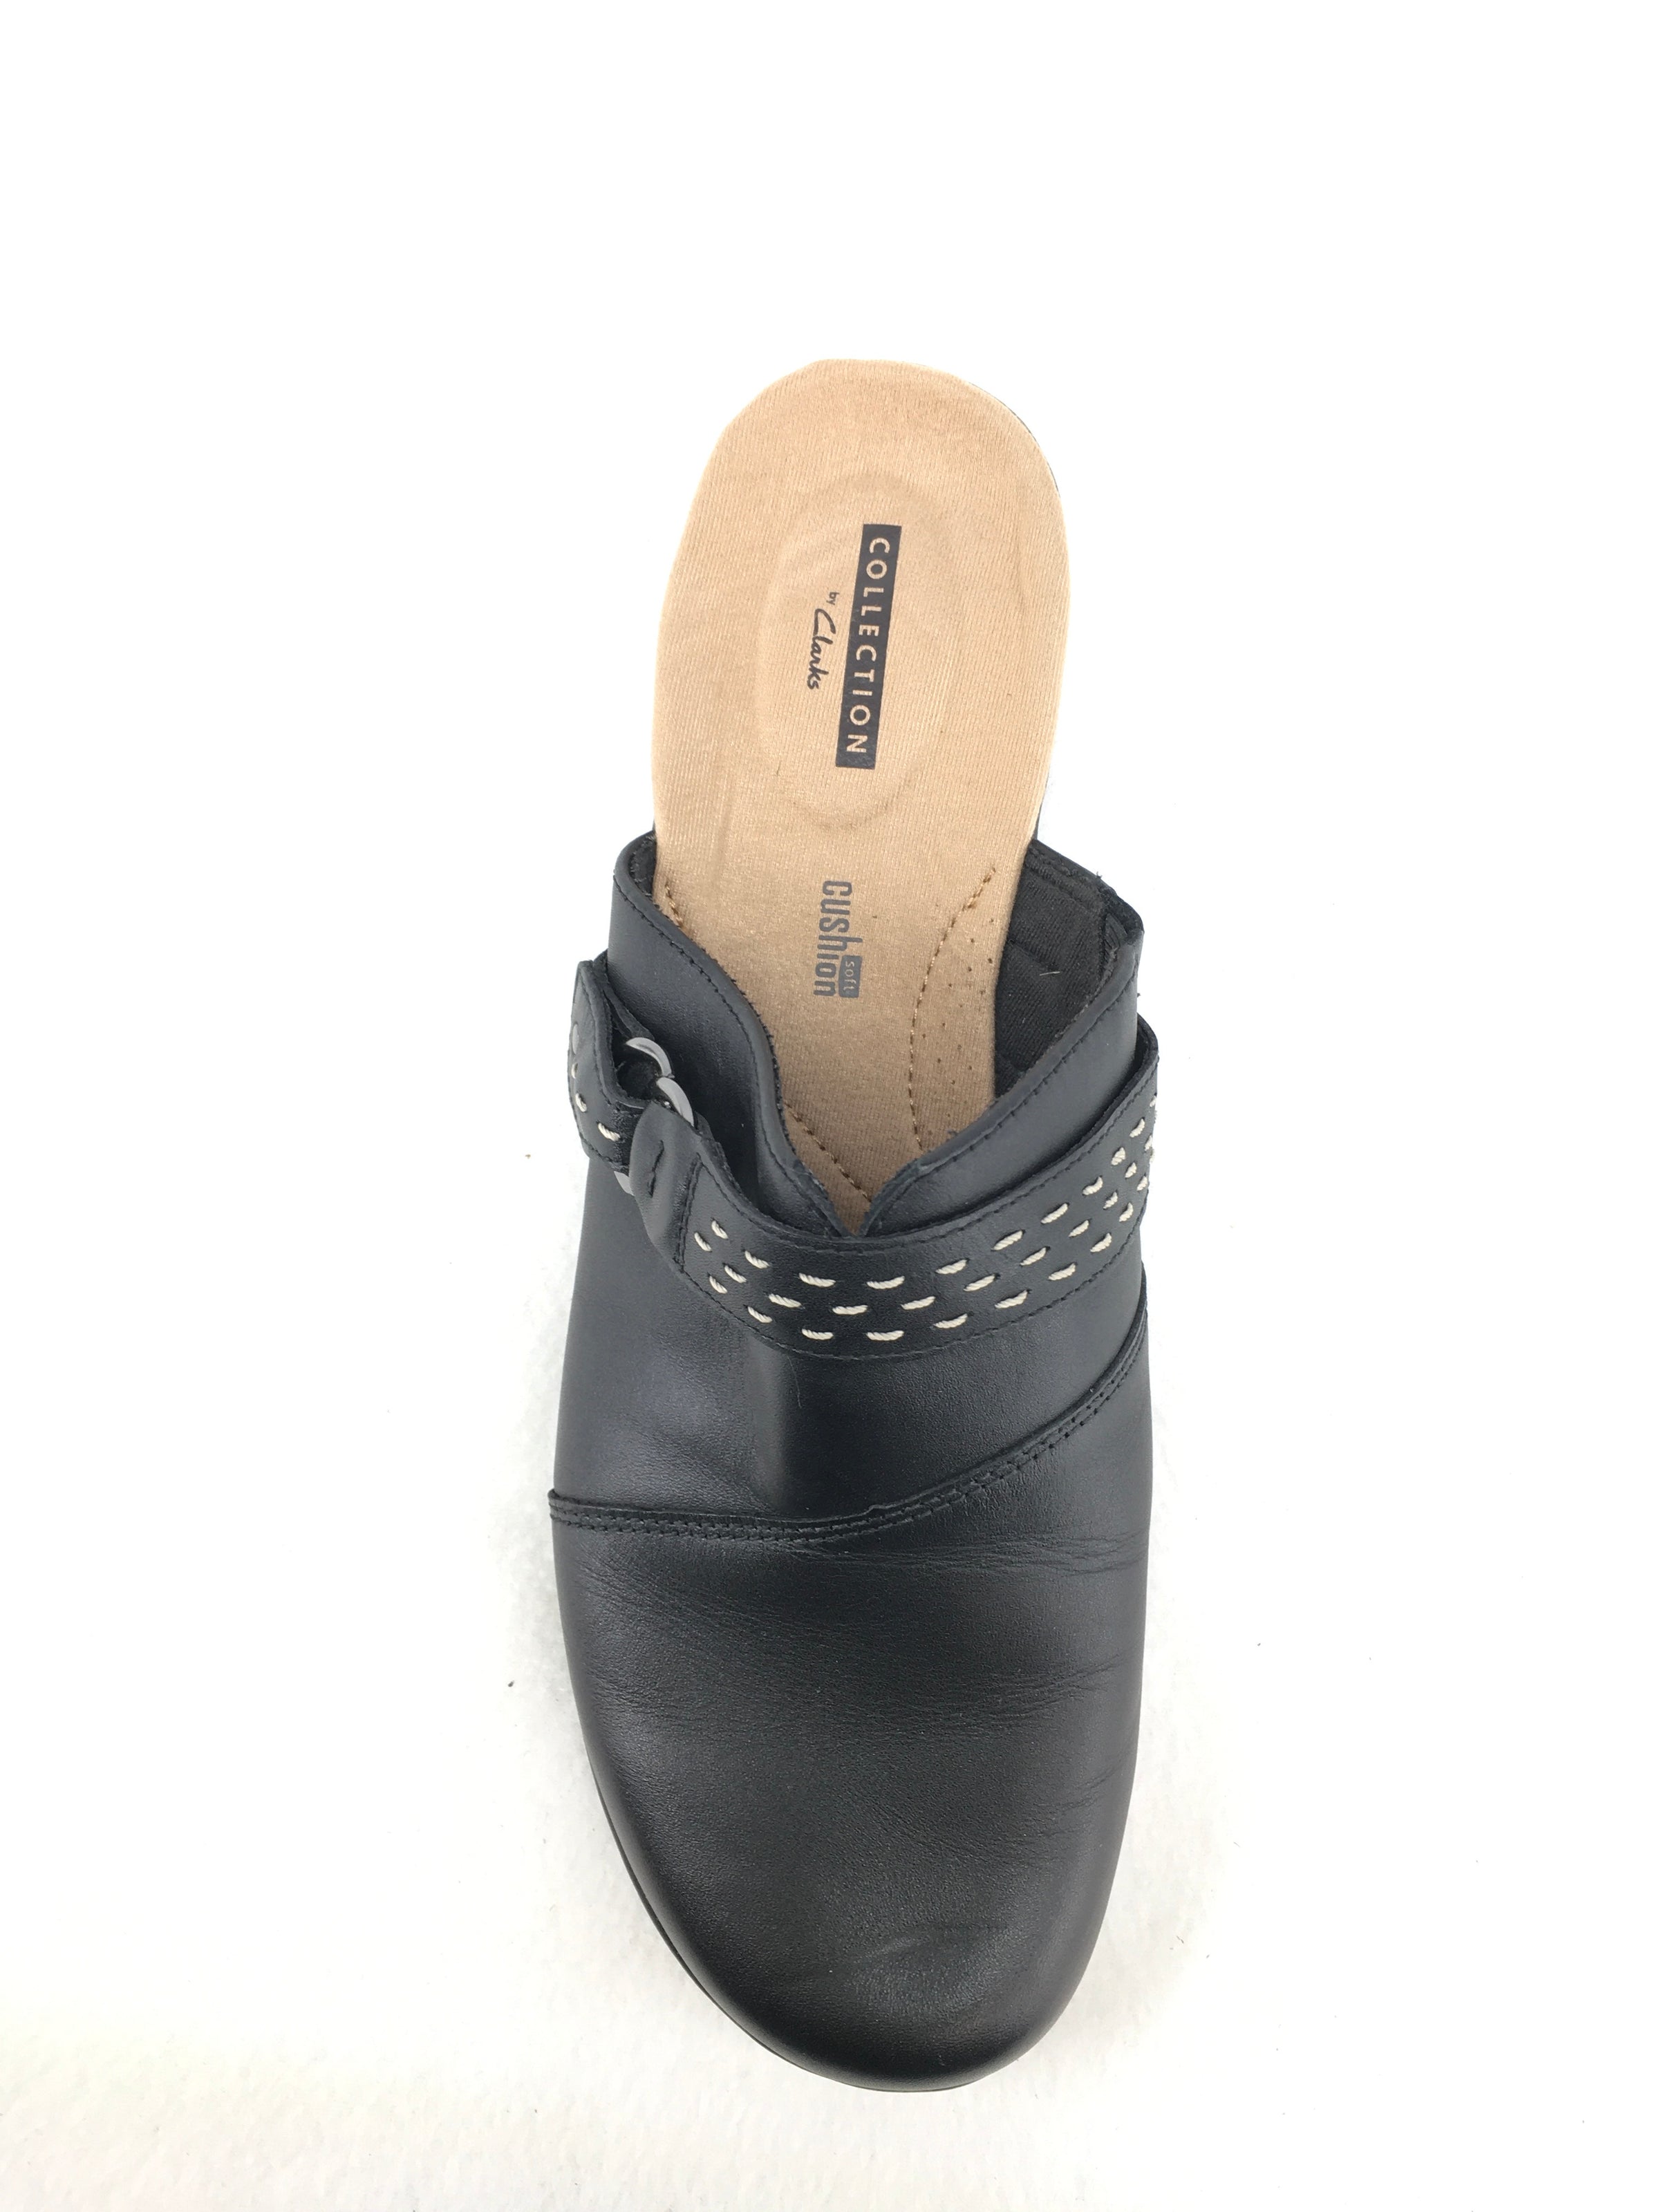 Collections by Clarks Comfort Mules Size 9W